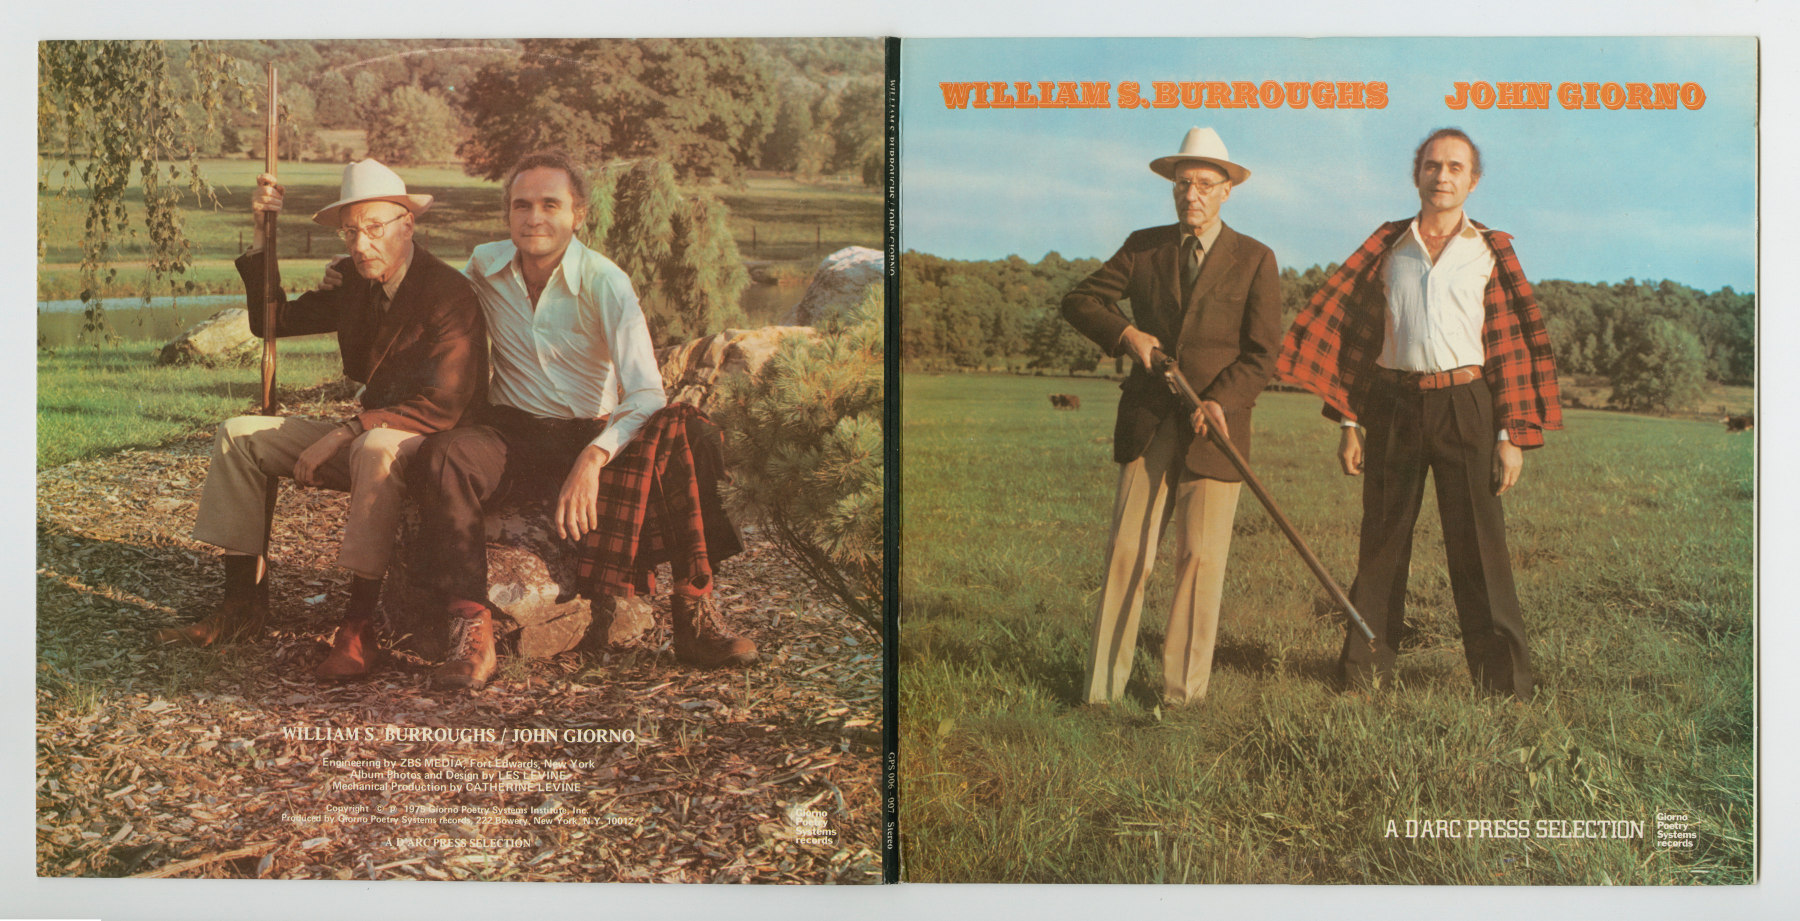 William S. Burroughs / John Giorno: A D'Arc Press Selection (1975), front and back cover